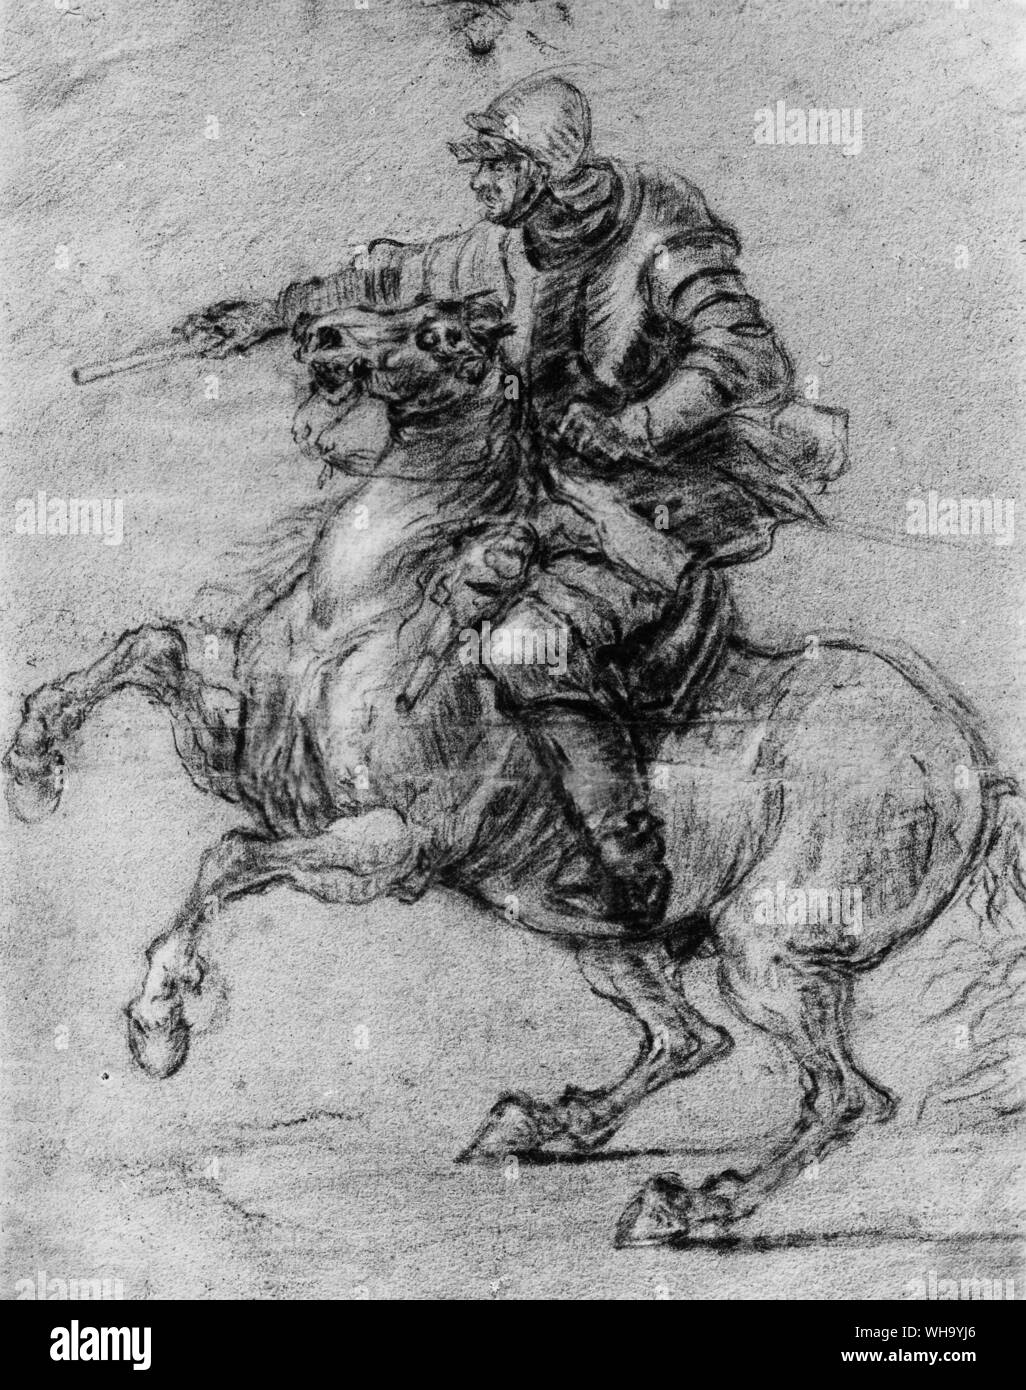 Armoured horseman. Possibly 17th C. European military. Stock Photo